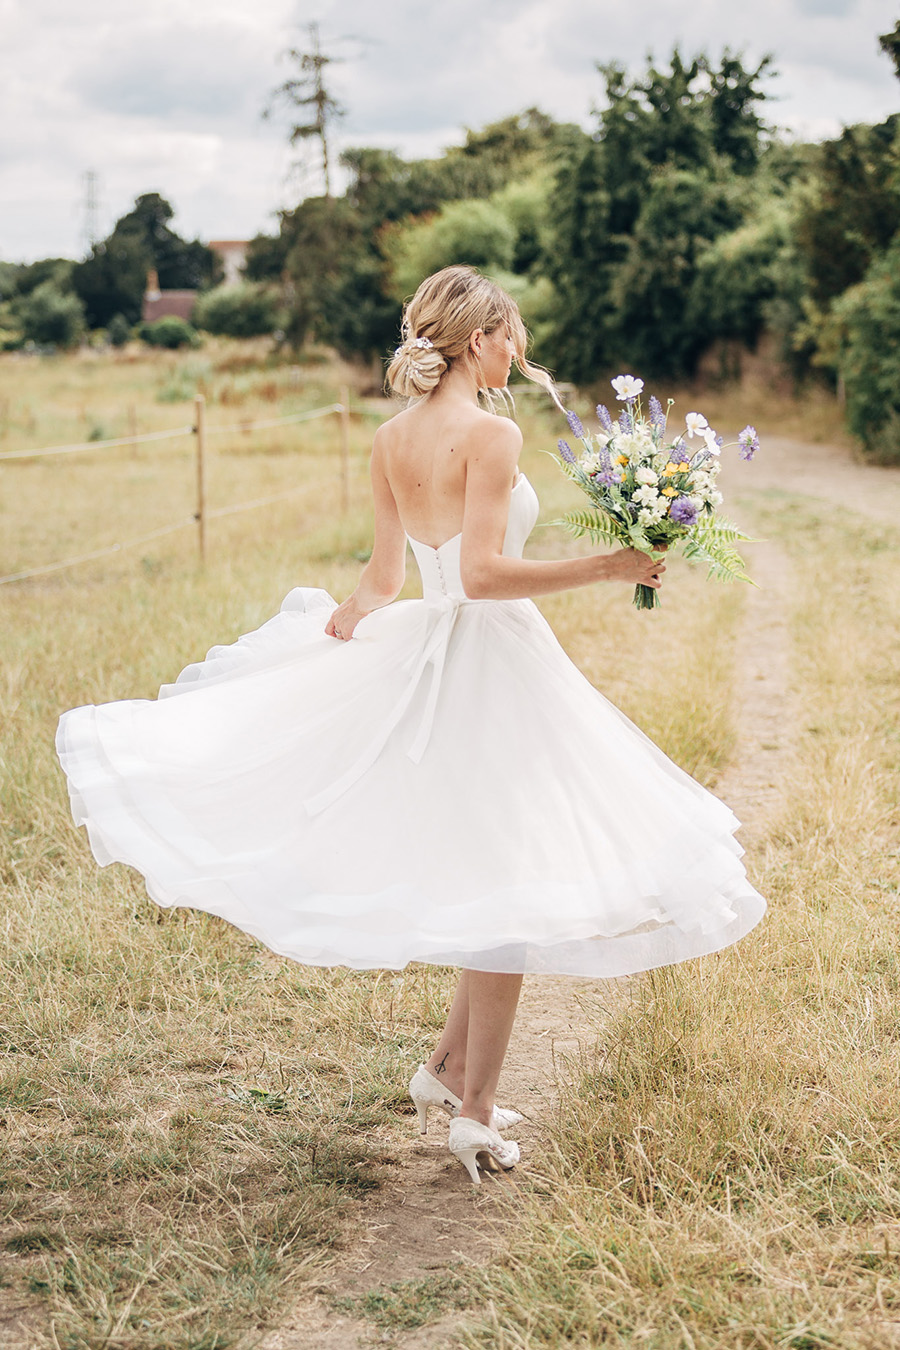 English heritage style inspiration for 2019 weddings, with Photography by Michaelangelo on English-Wedding.com (27)